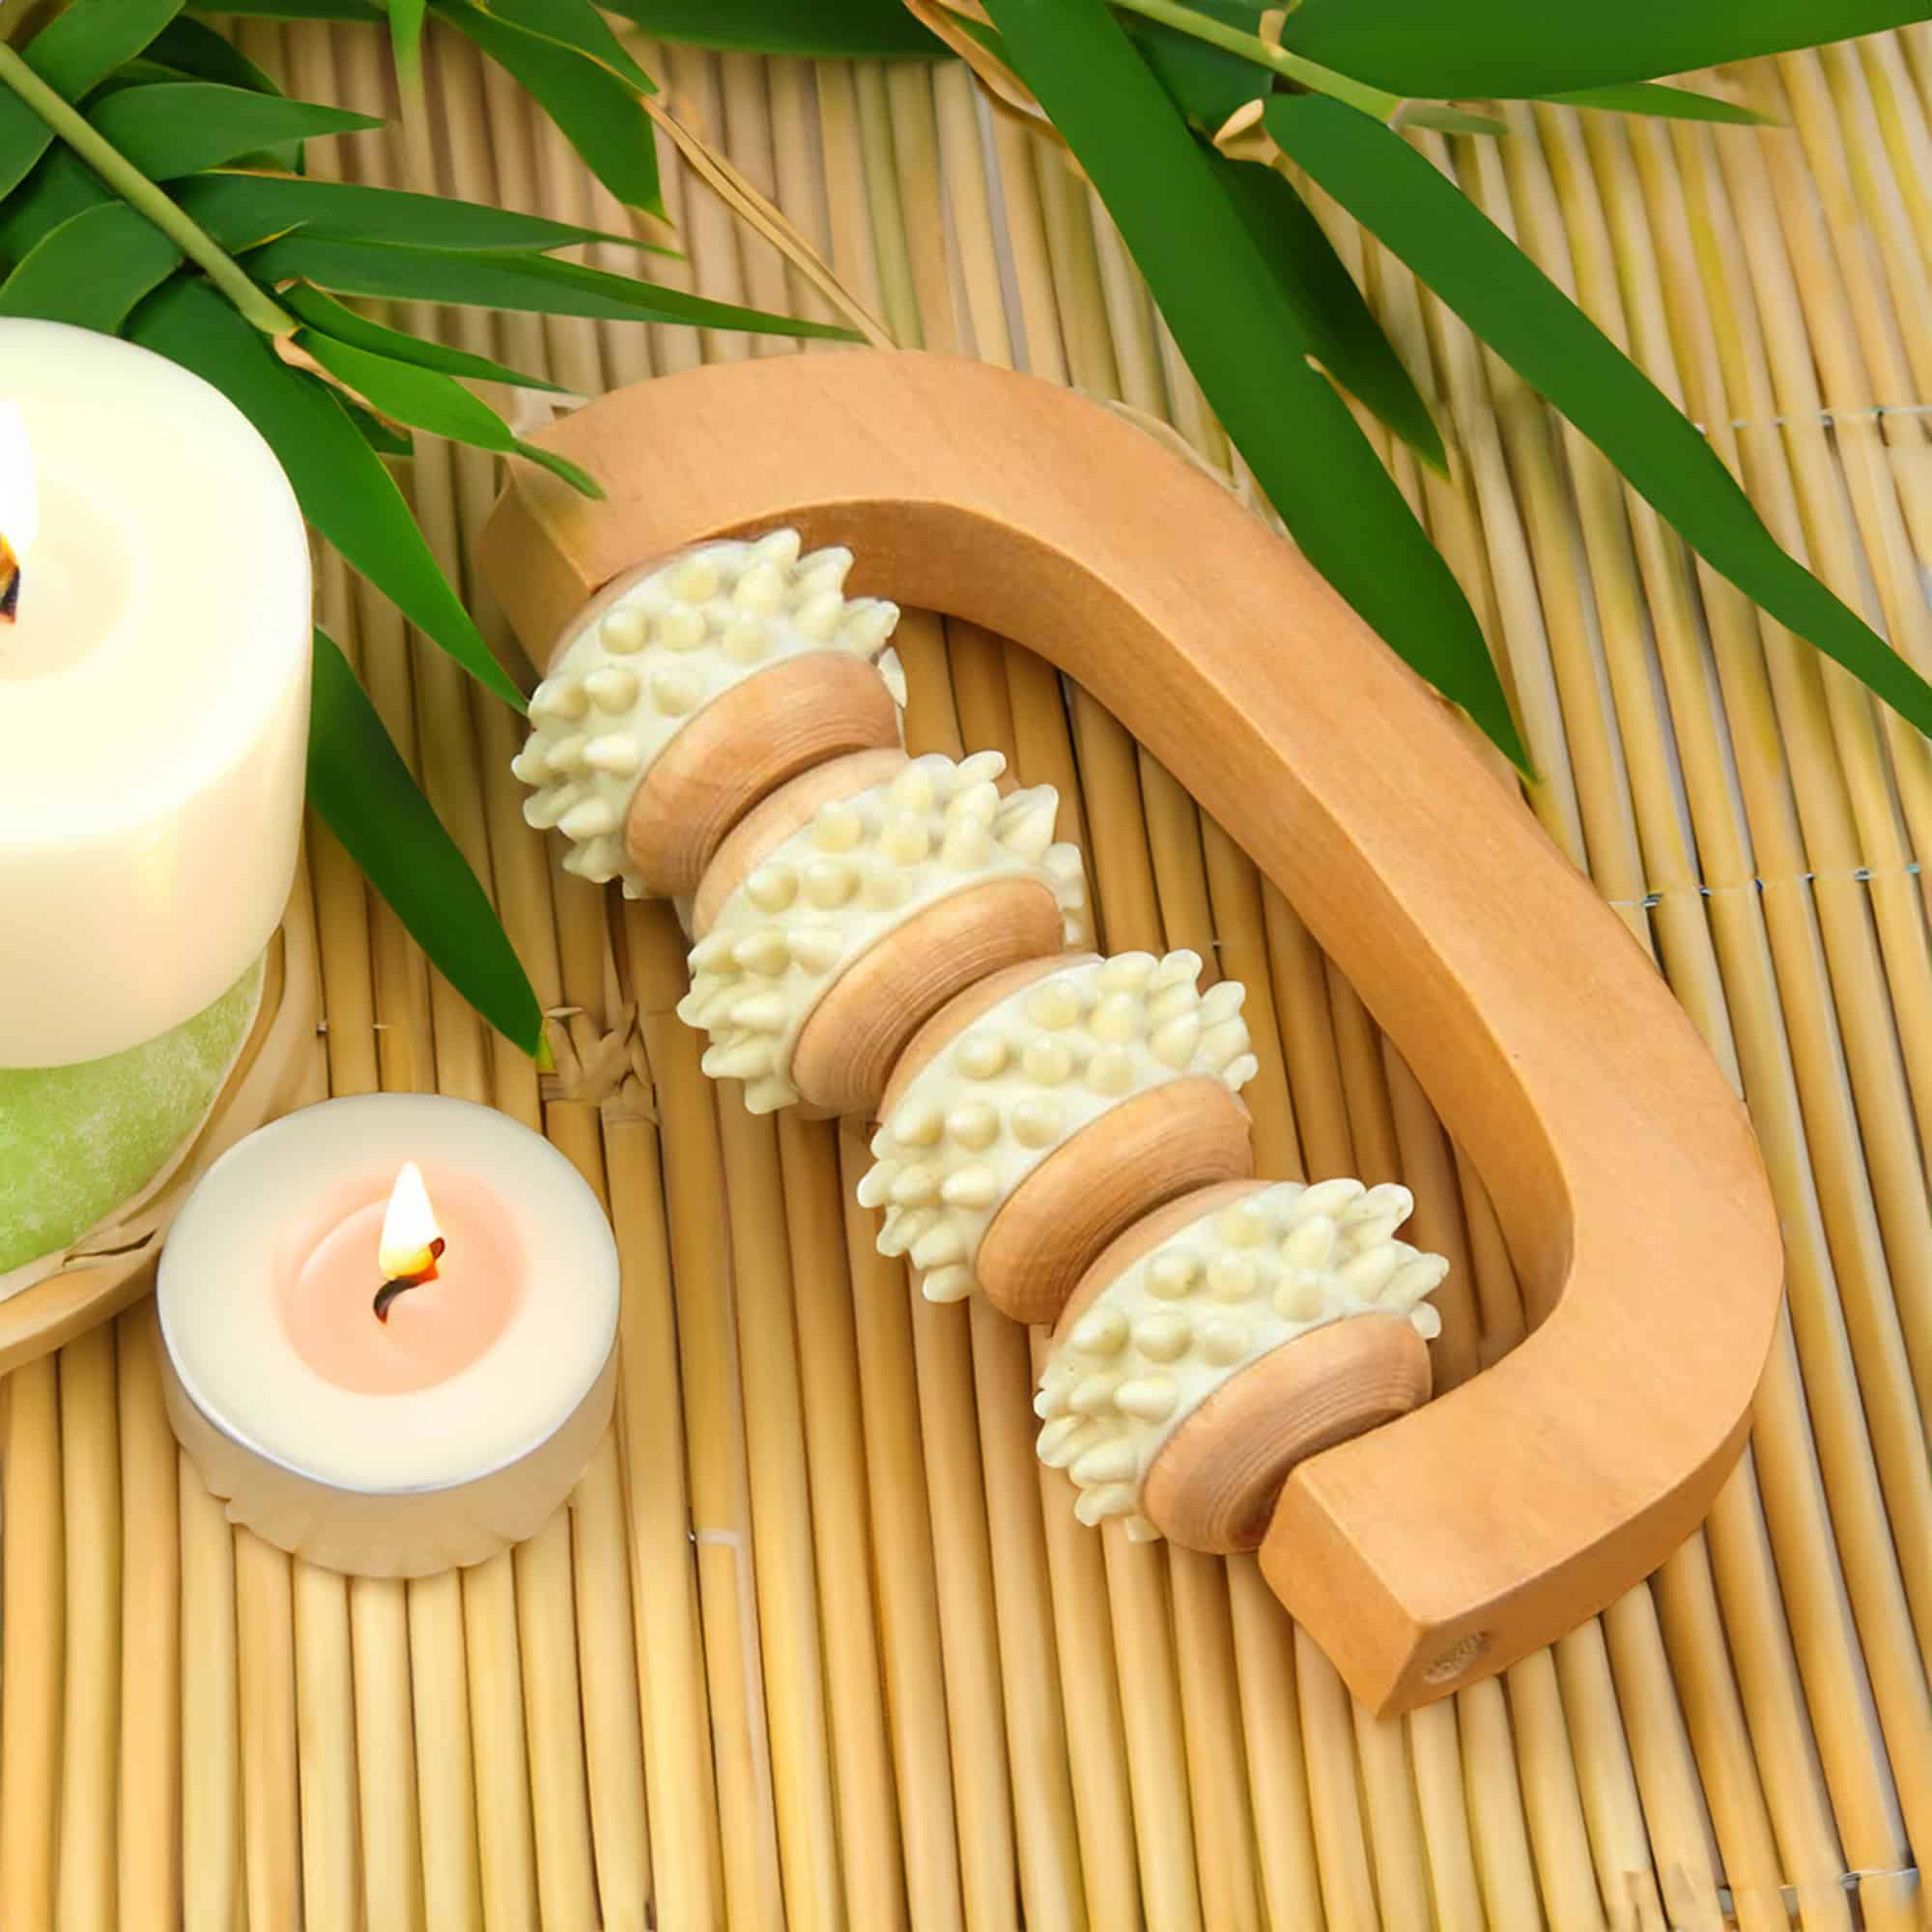 Spa-quality natural wooden massage roller with four contouring wheels, displayed on bamboo mat with candles and greenery for a serene self-care atmosphere.